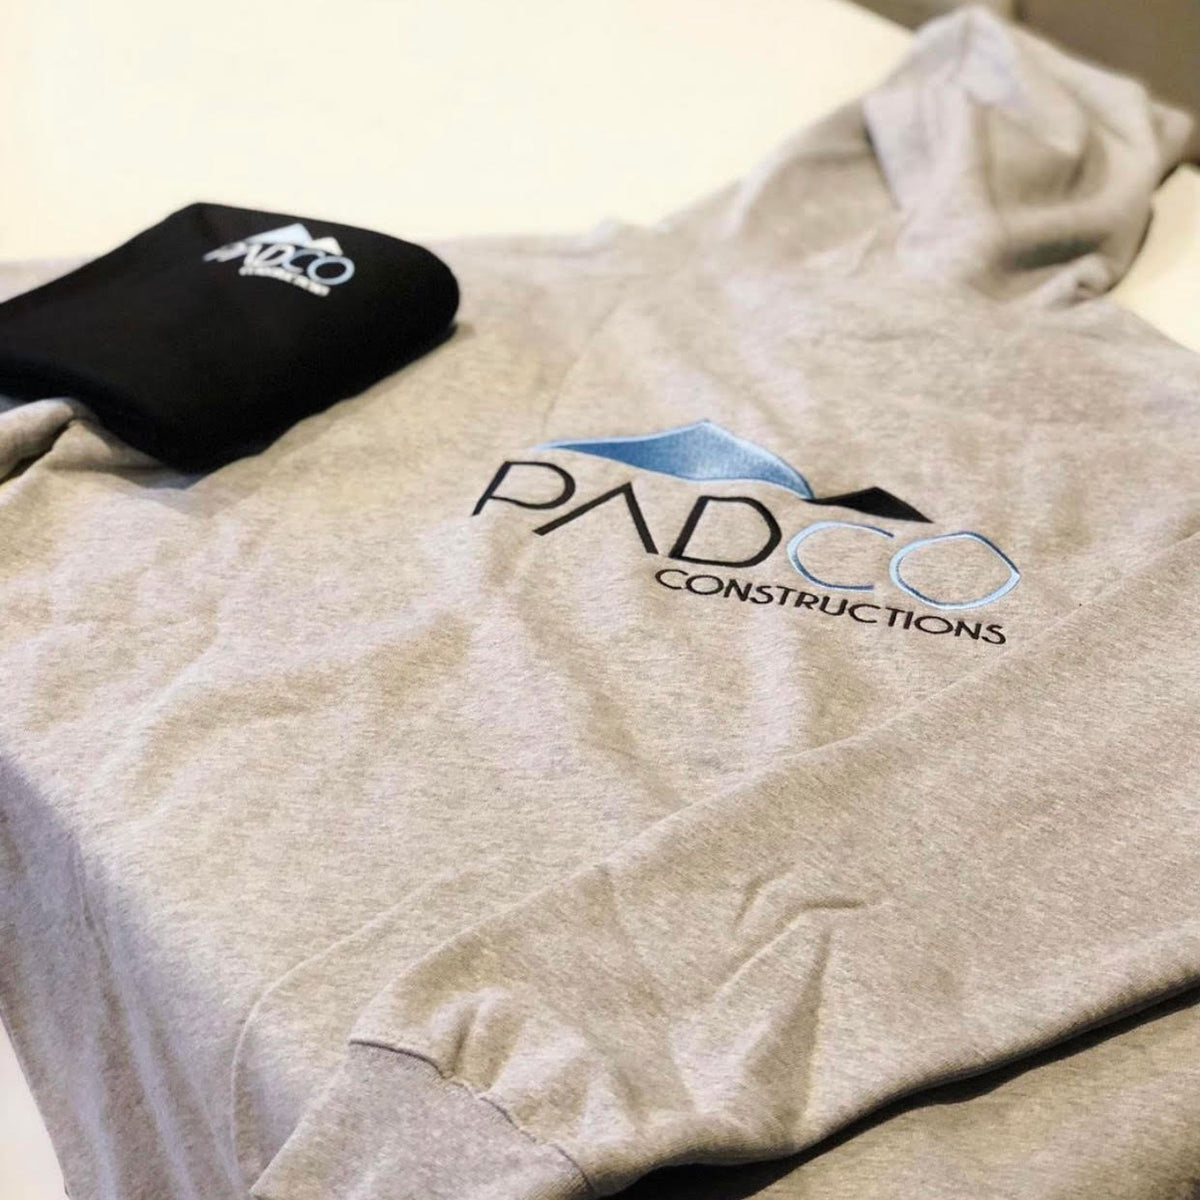 Embroidery on hoodie and beanie for Padco Constructions